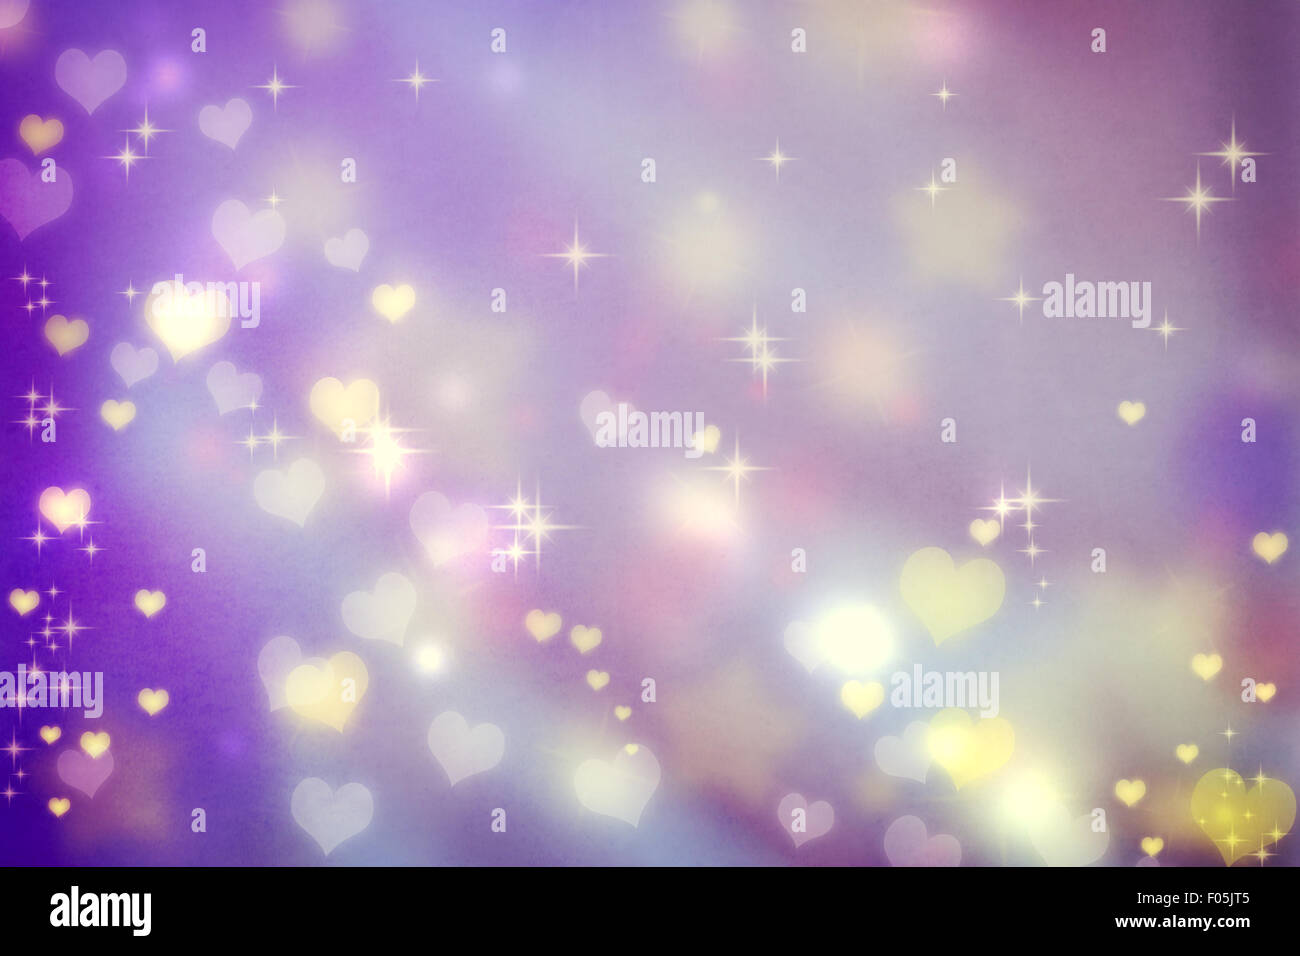 Golden small hearts on purple background with stars Stock Photo